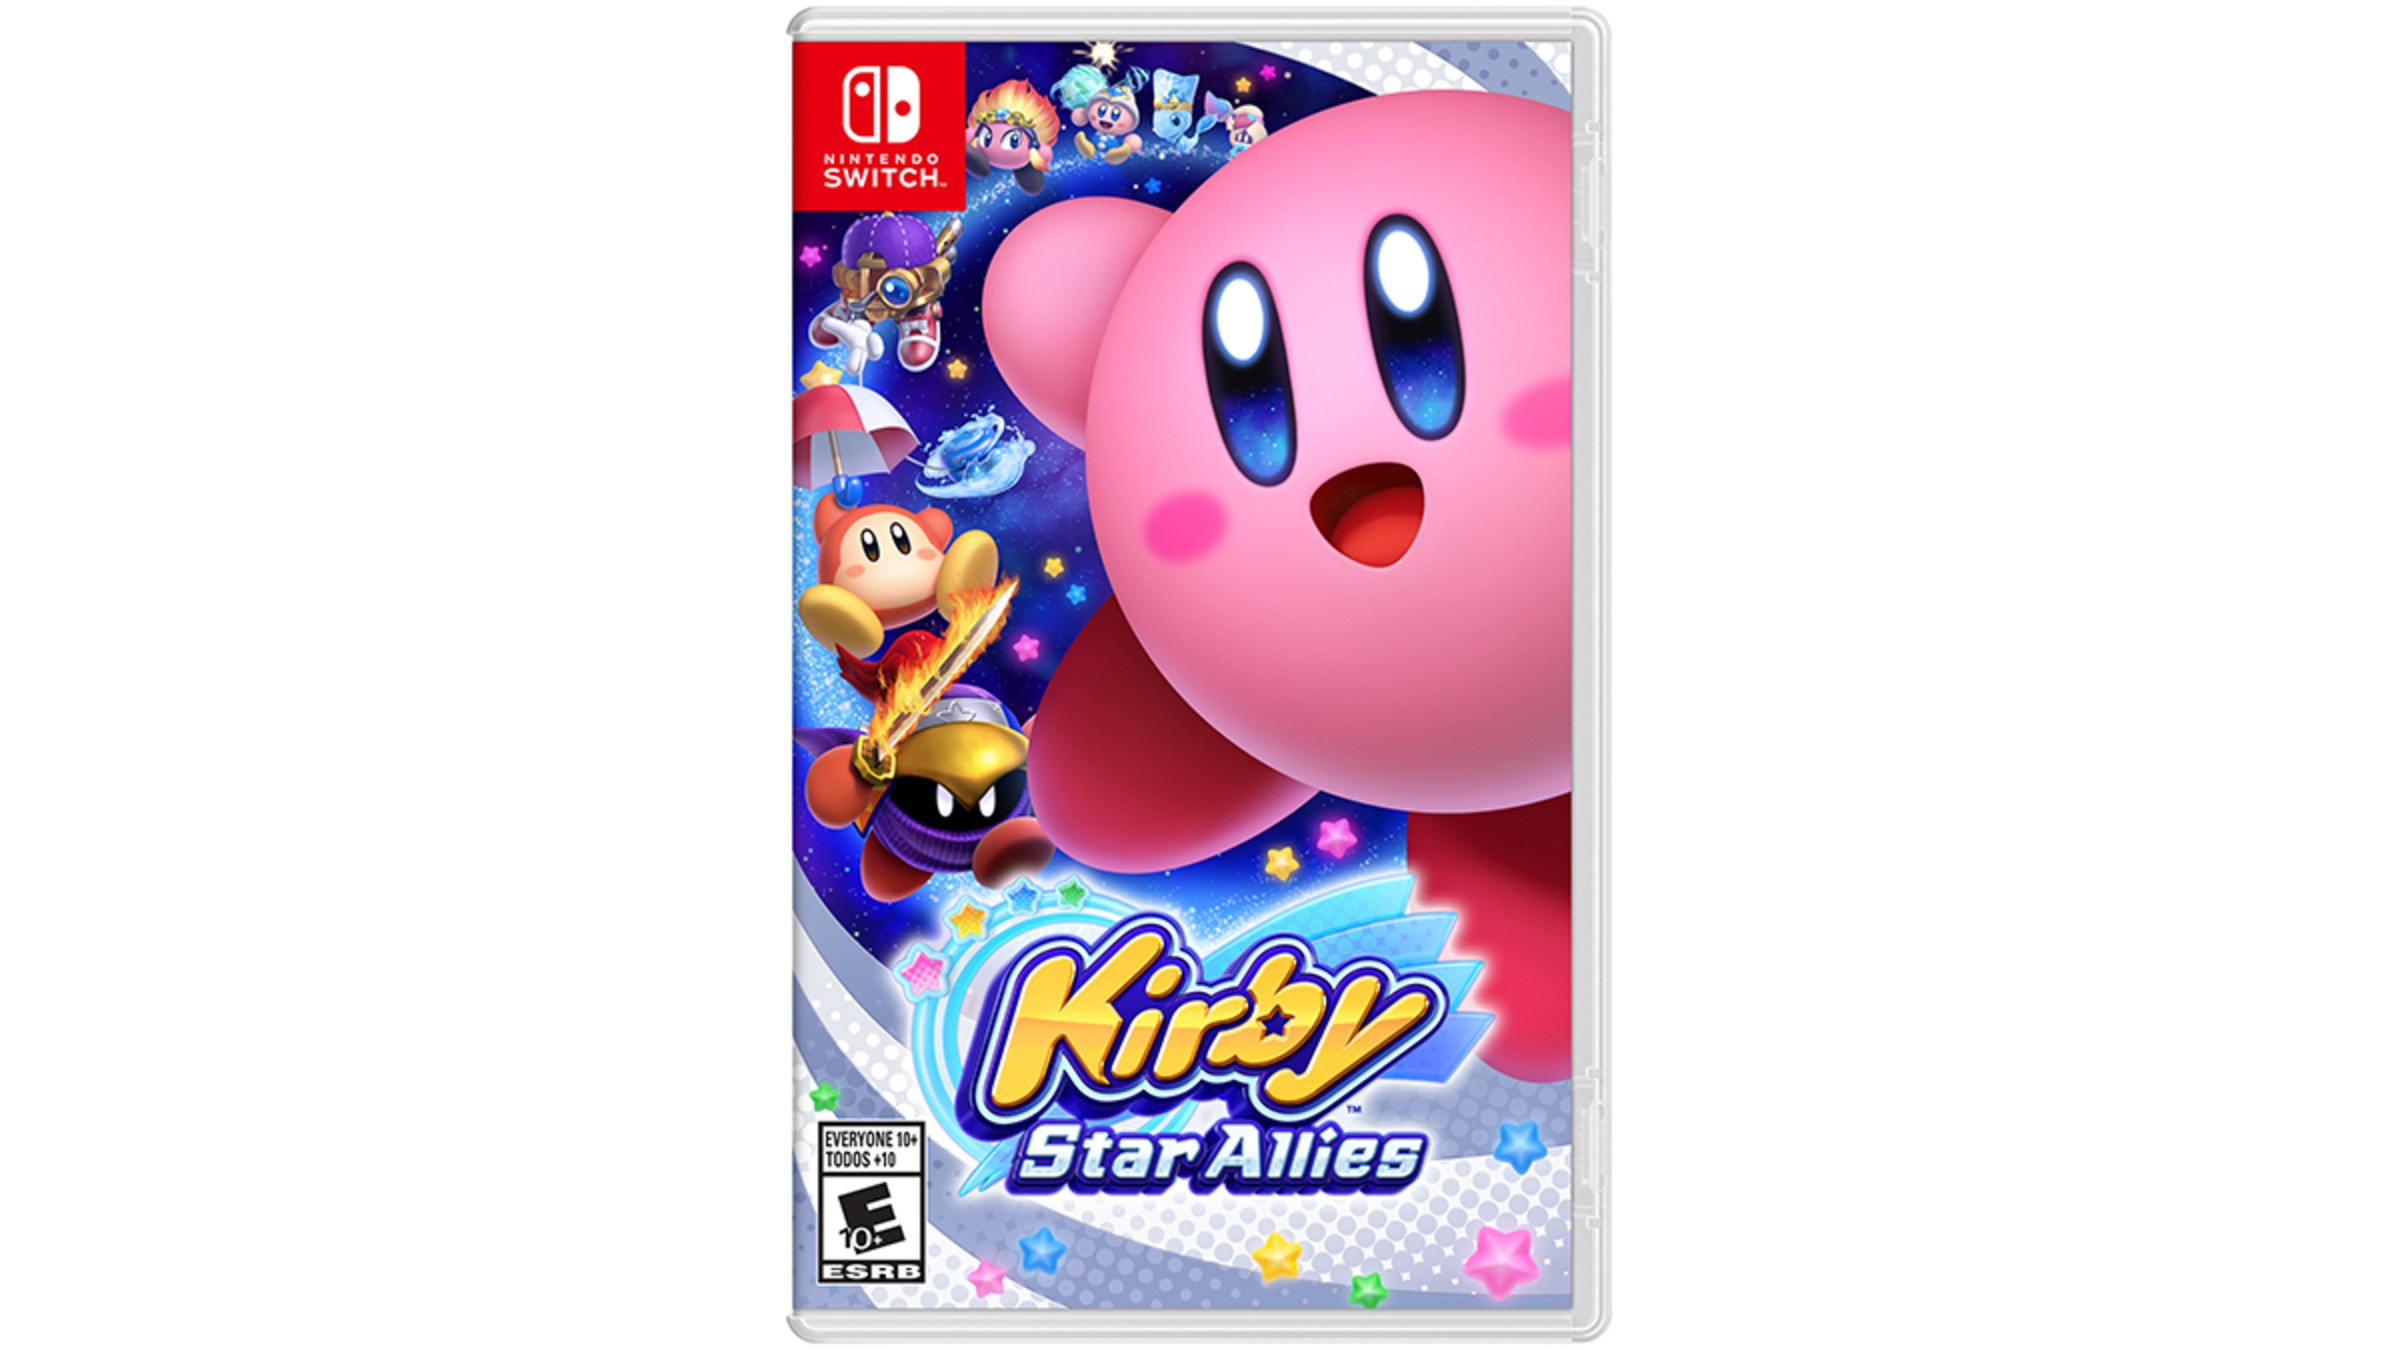 Kirby Star Allies demo now available on Nintendo Switch